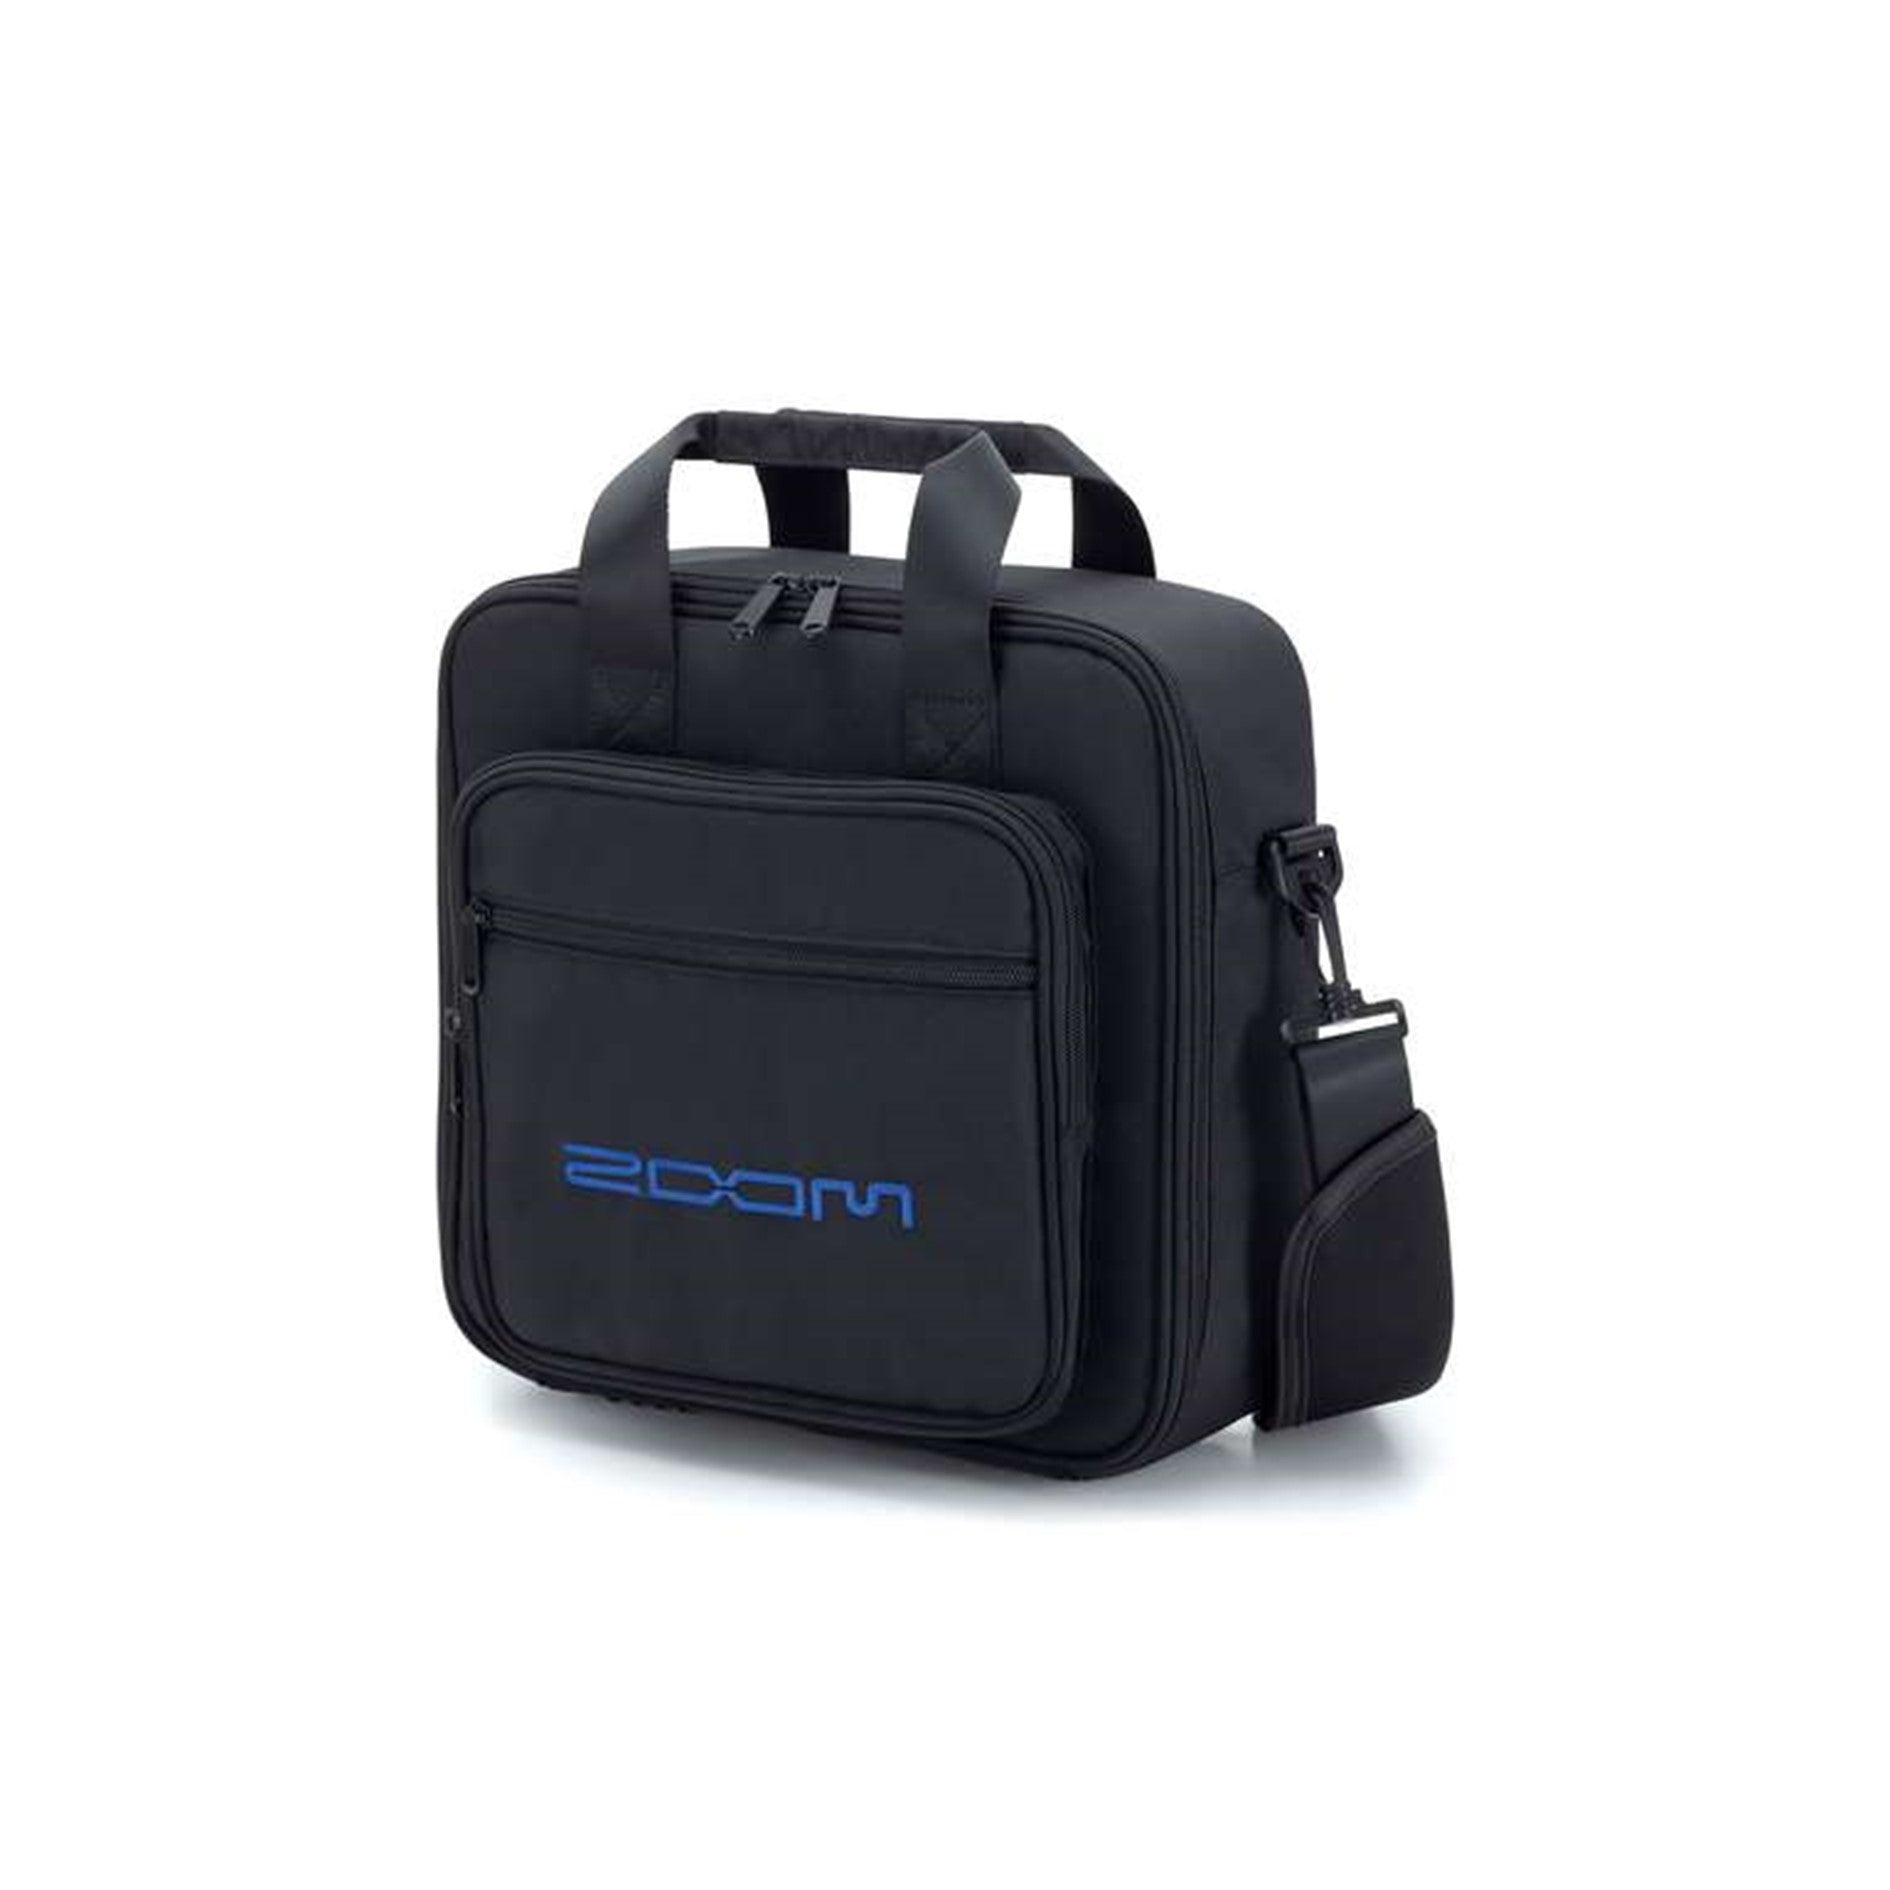 Zoom CBL-8 Carrying Bag for the L-8